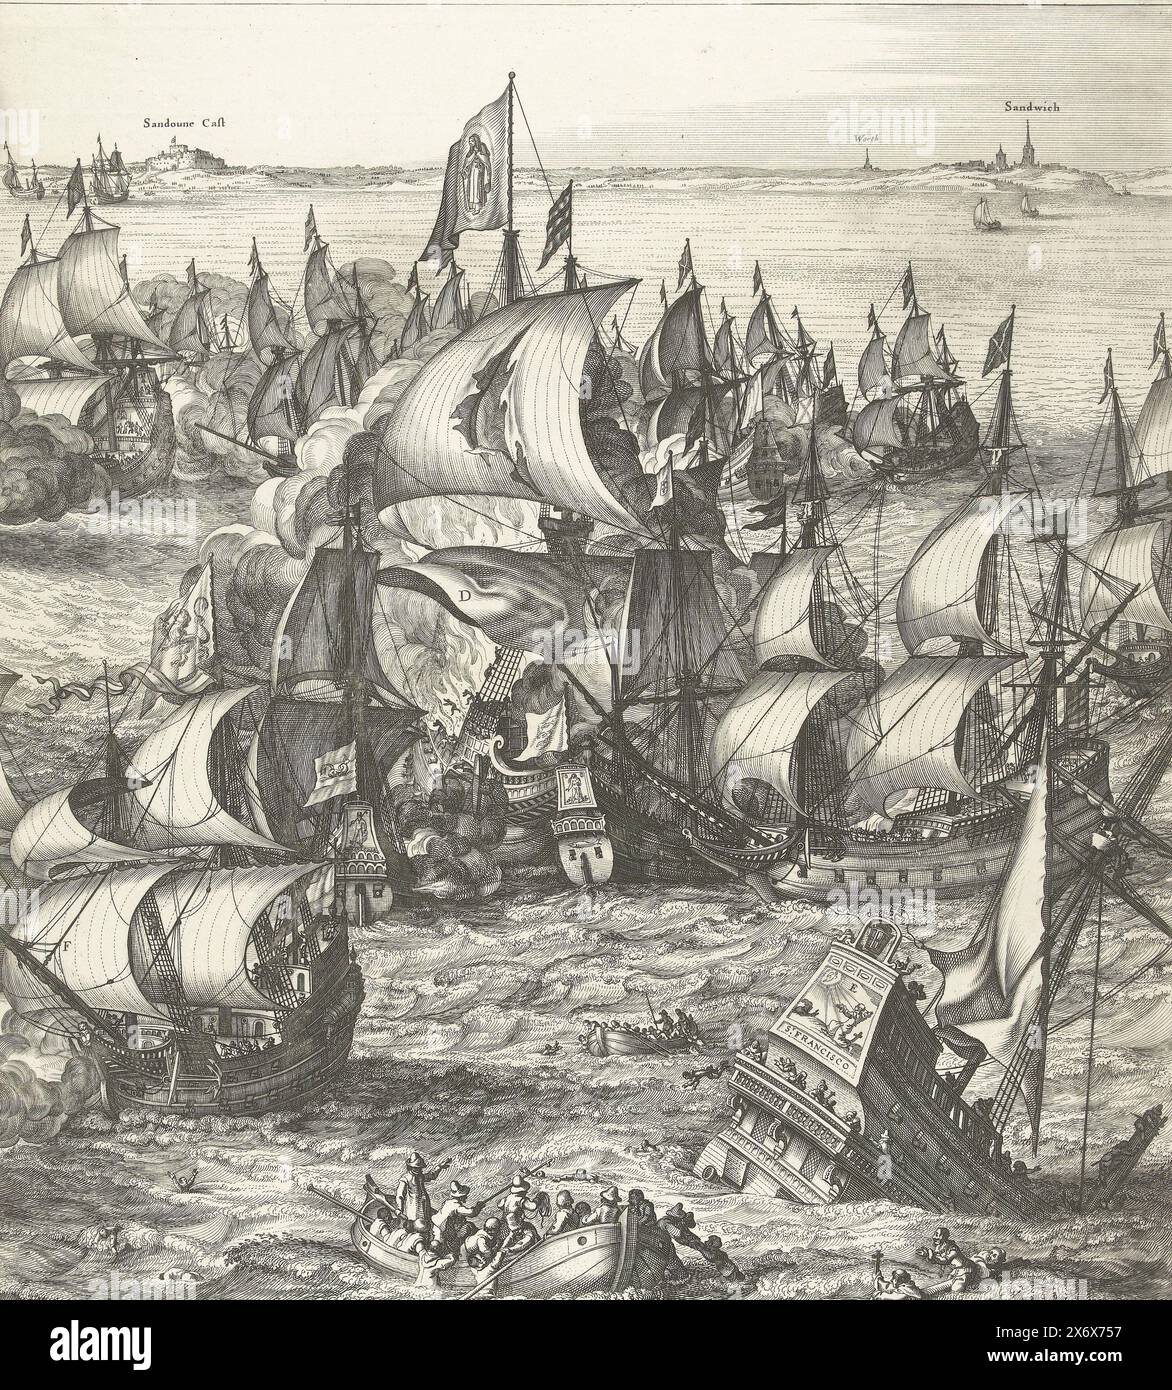 The great sea battle at Duins (plate 4), 1639, Pugna navalis qua Hispanos vicere in Duins Angliae Belgae Foederati Ao. MDCXXXIX (title on object), Large representation of the naval battle at Duins between the Spanish fleet commanded by Antonio de Oquendo and the Dutch fleet under Maarten Harpertsz. Tromp, October 21, 1639. Sheet 4: battles at sea, centrally the destruction of the Santa Teresa, in the foreground drowning people are pulled out of the water near the sinking St. Francisco. In the background the English coast near Sandwich. Unassembled ensemble consisting of 7 numbered plates, the Stock Photo